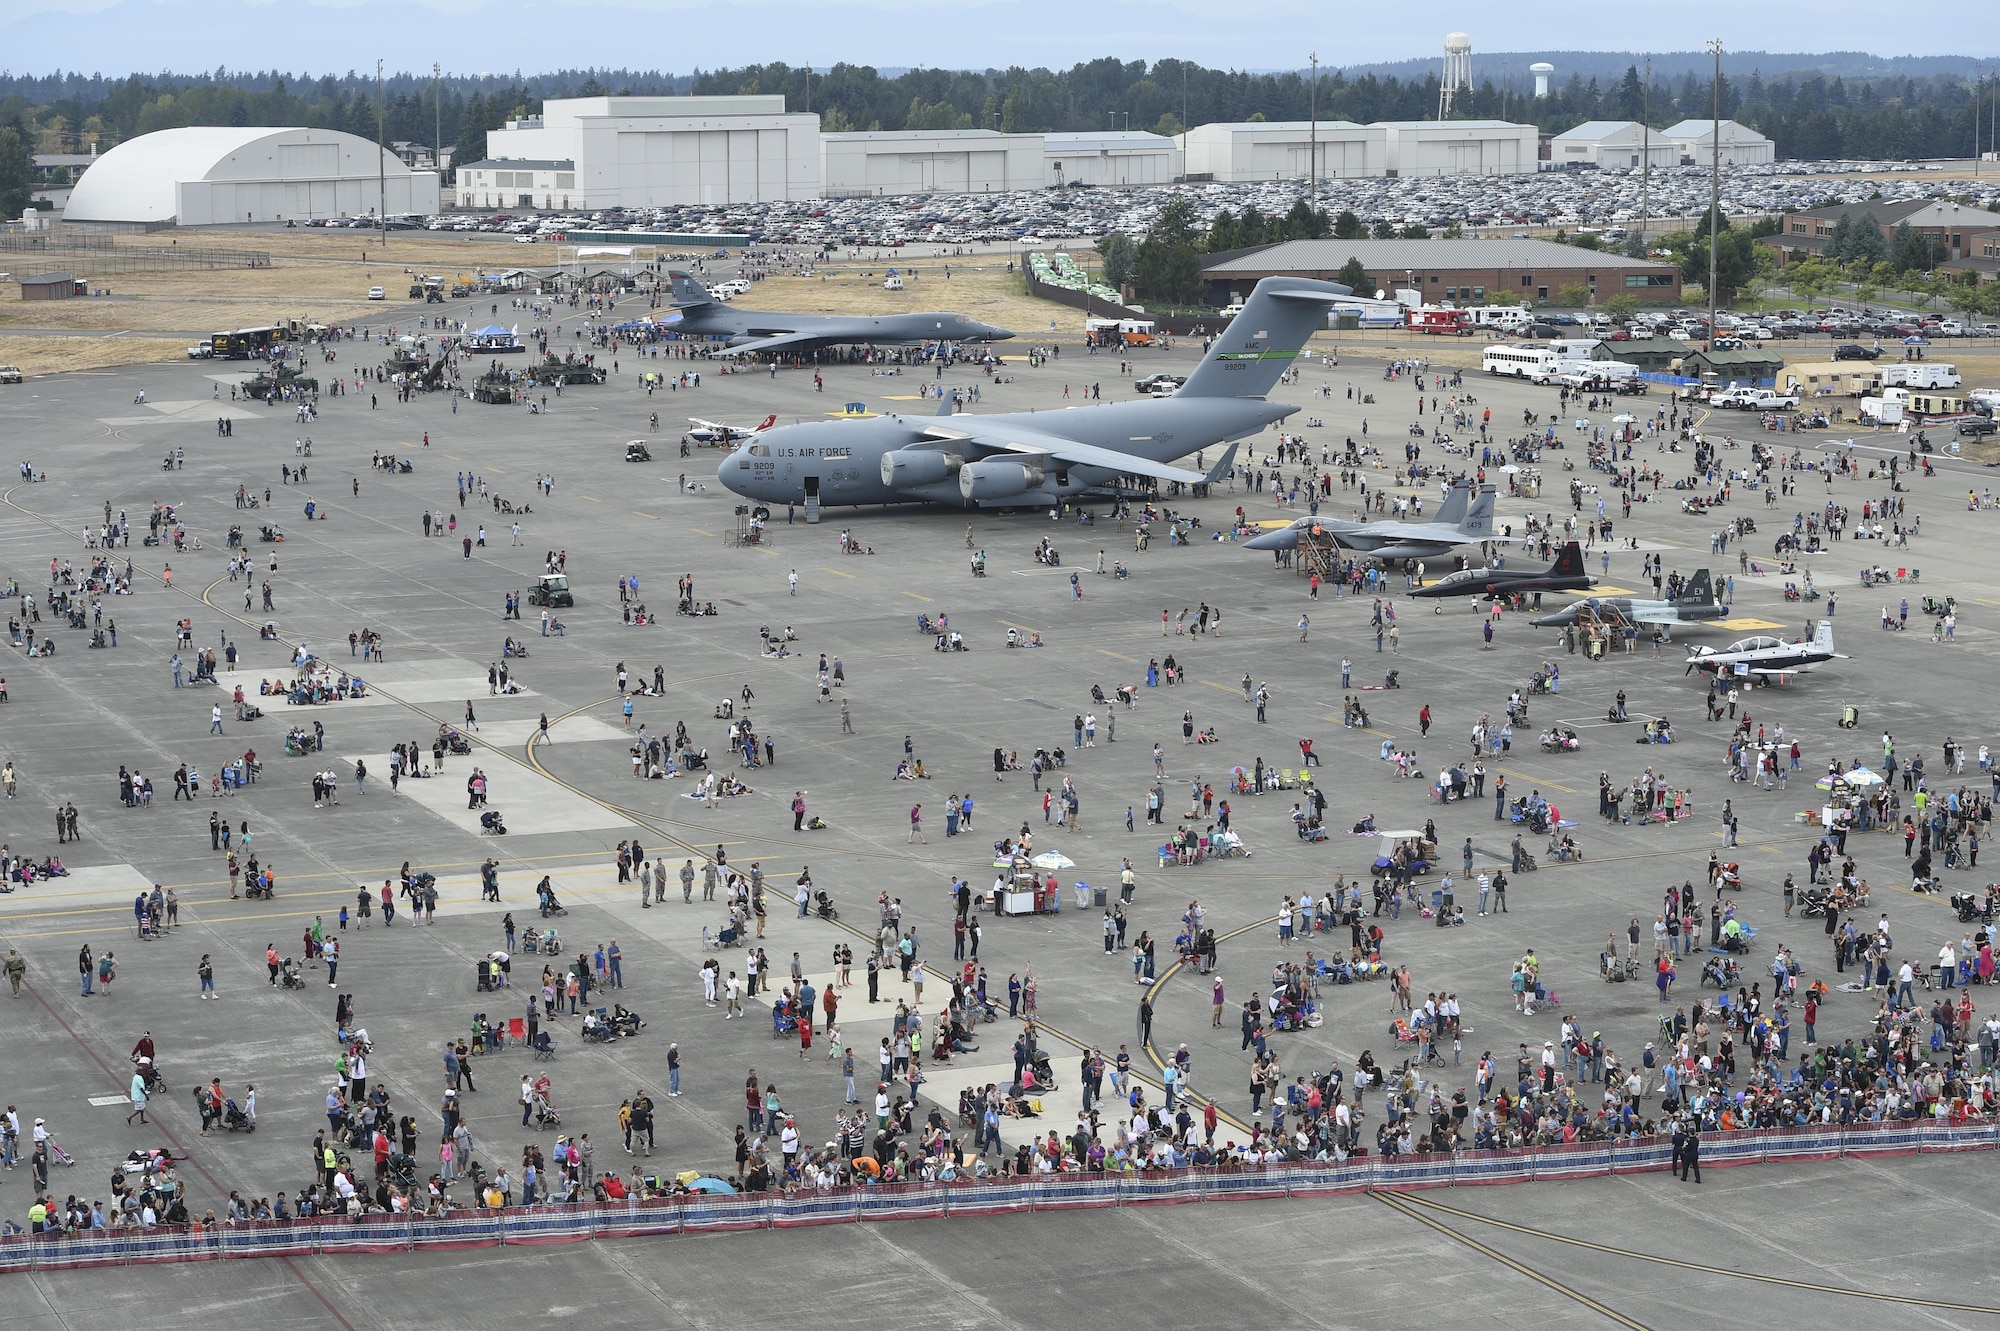 Thousands of people walk around during the Joint Base Lewis-McChord Airshow and Warrior Expo Aug. 27, 2016, at JBLM, Washington. The community was able to visit various static air craft displays, talk to Soldiers and Airmen and also experience several hours of air show performances. (U.S. Air Force photo/Staff Sgt. Naomi Shipley)